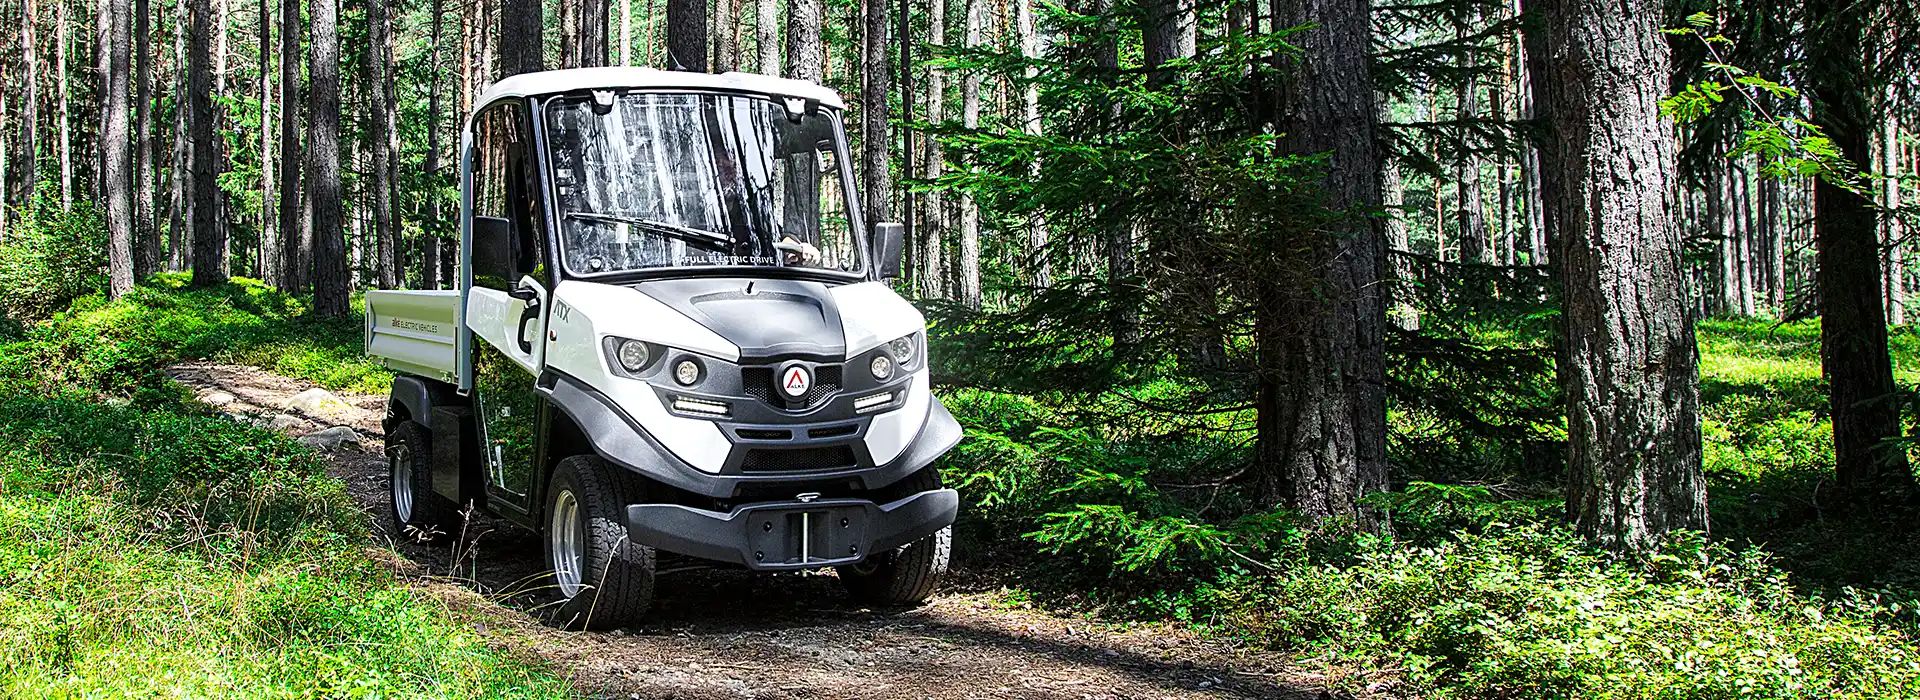 Alke' off road electric vehicles ATX340EH